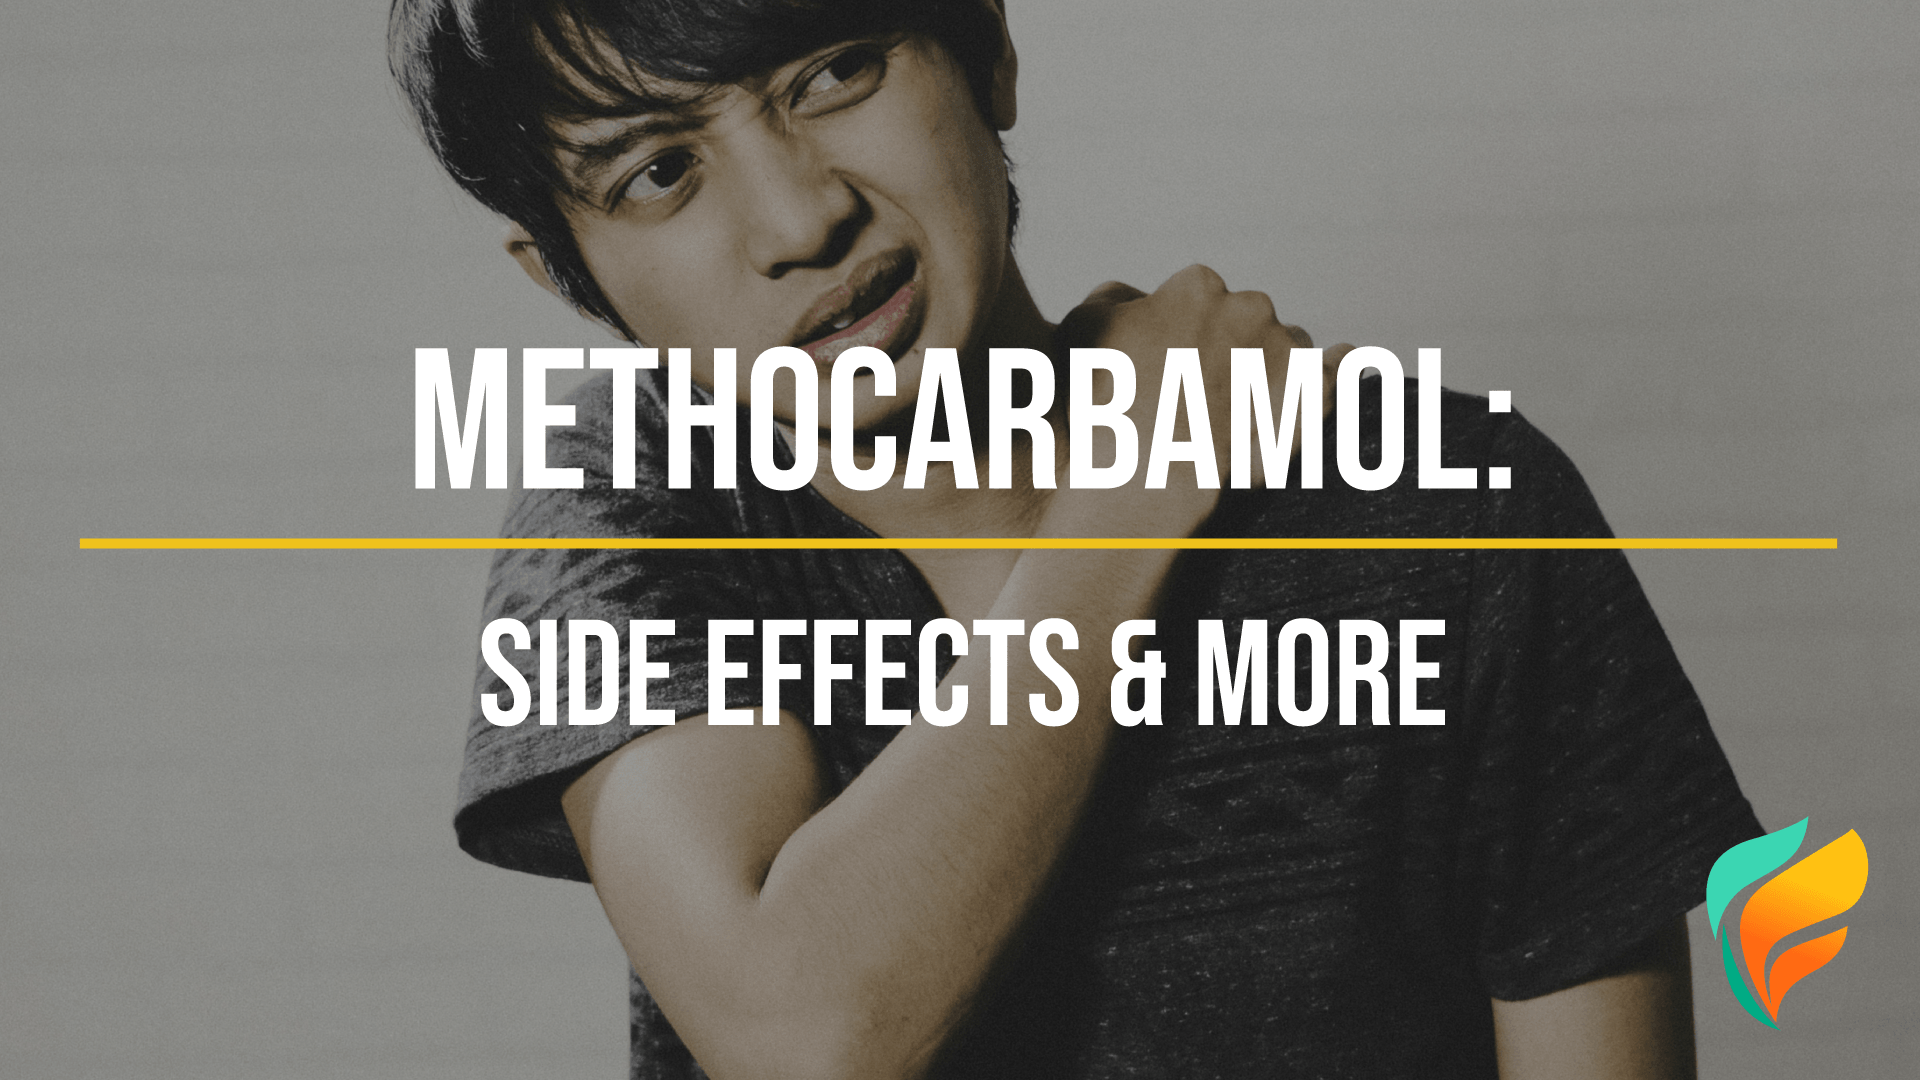 Methocarbamol Side Effects: Get the Facts About Robaxin Today